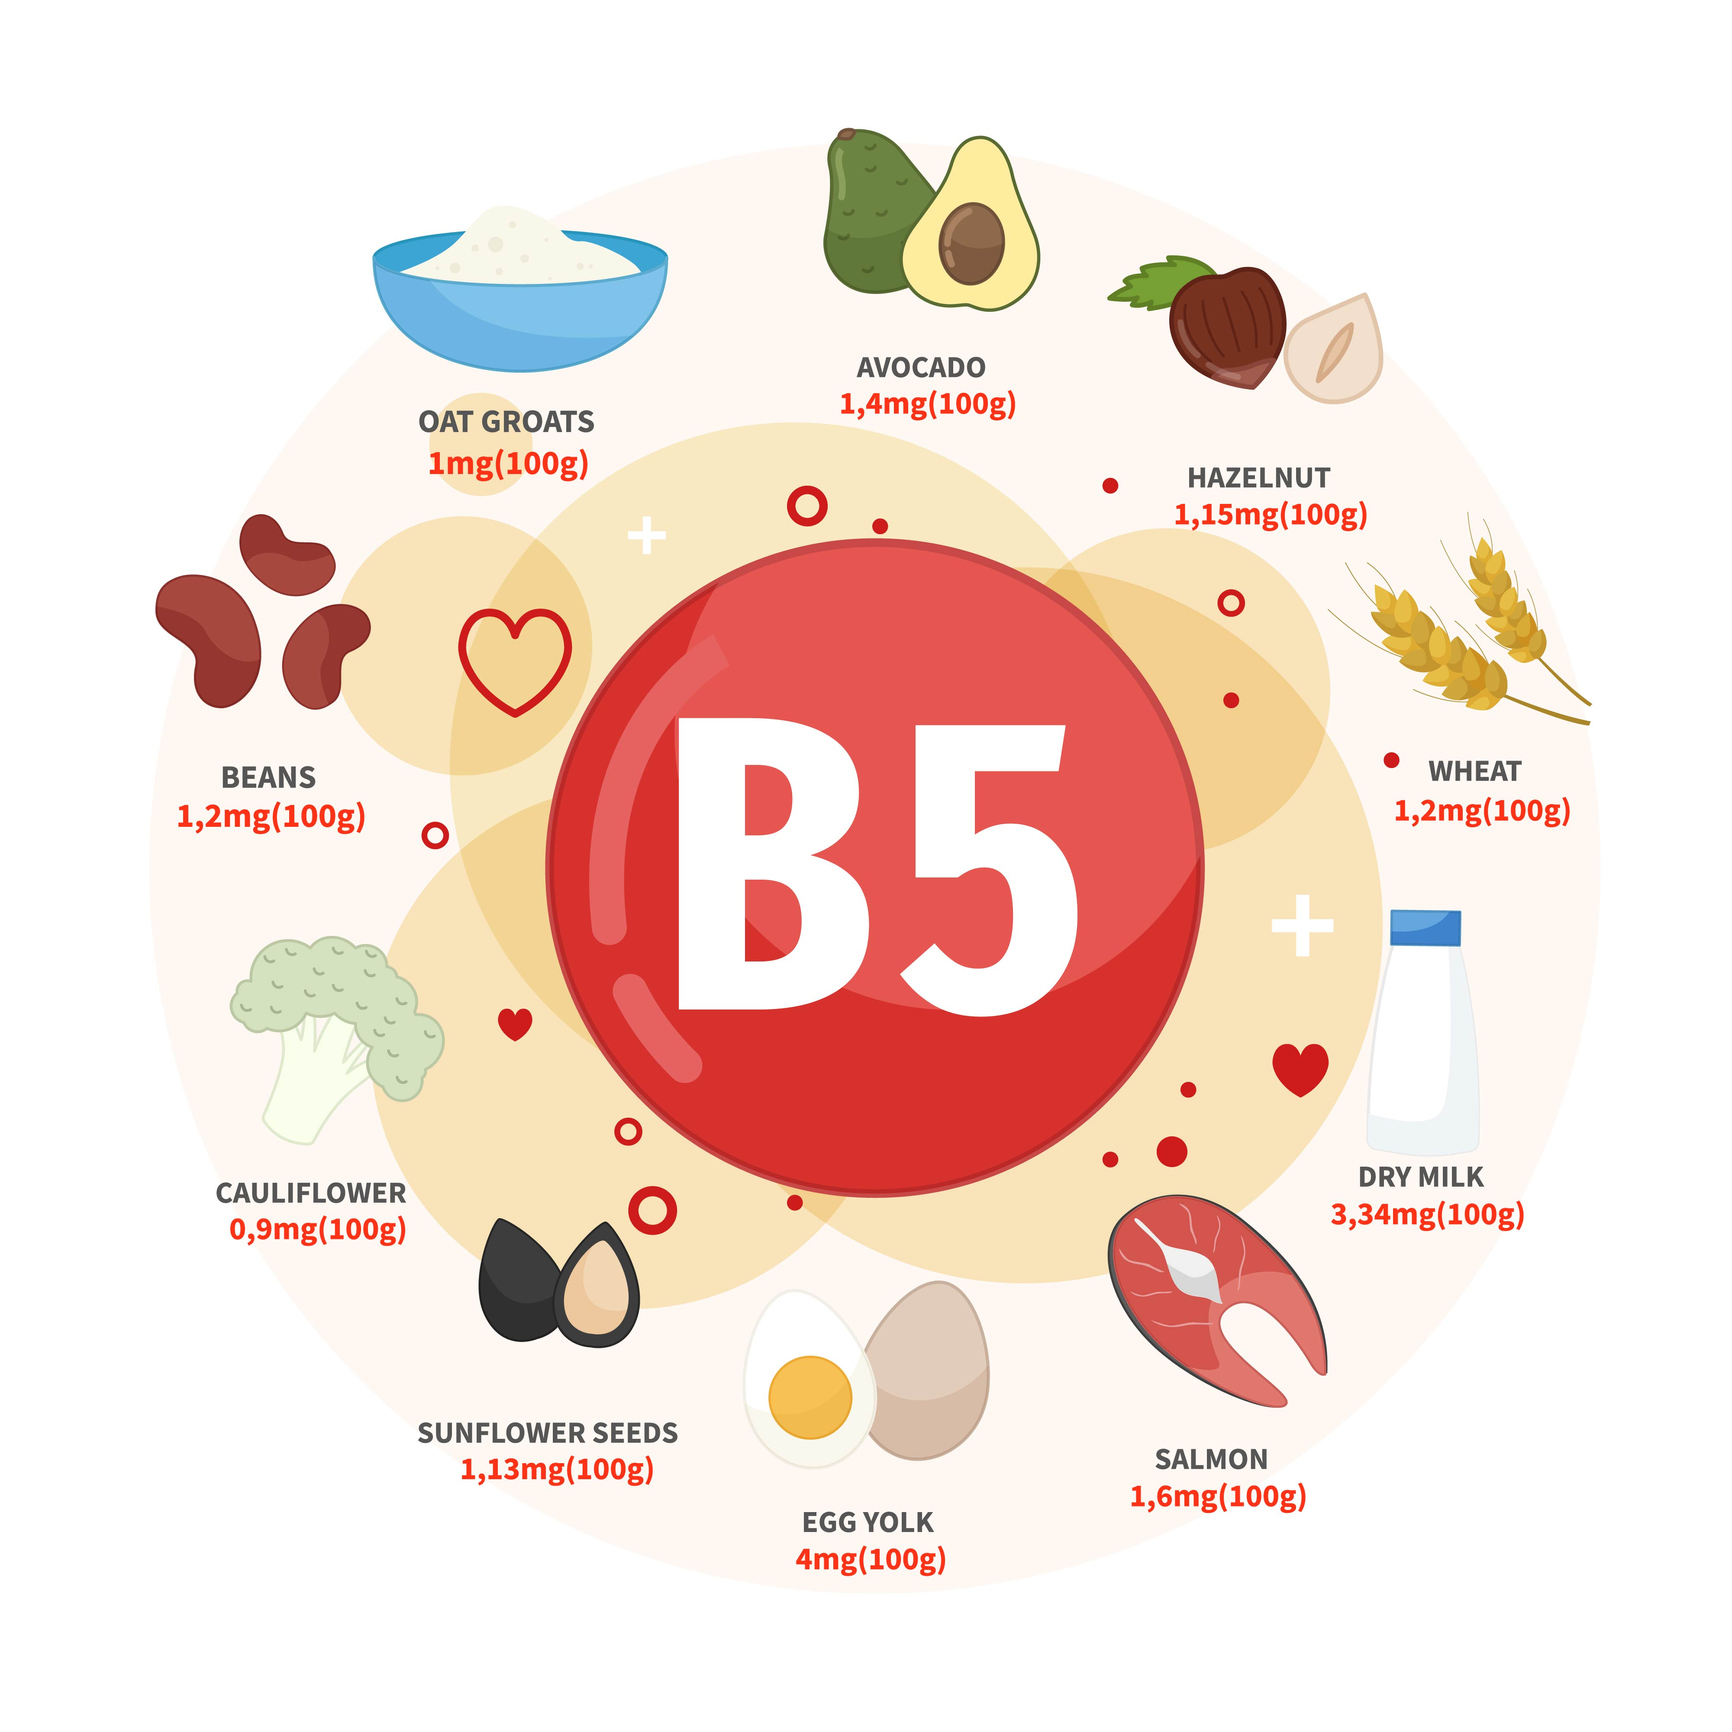 The best sources of vitamin B5 include avocados, hazelnuts, wheat, milk, salmon, eggs, sunflower seeds, cauliflower, beans, oatmeal. 